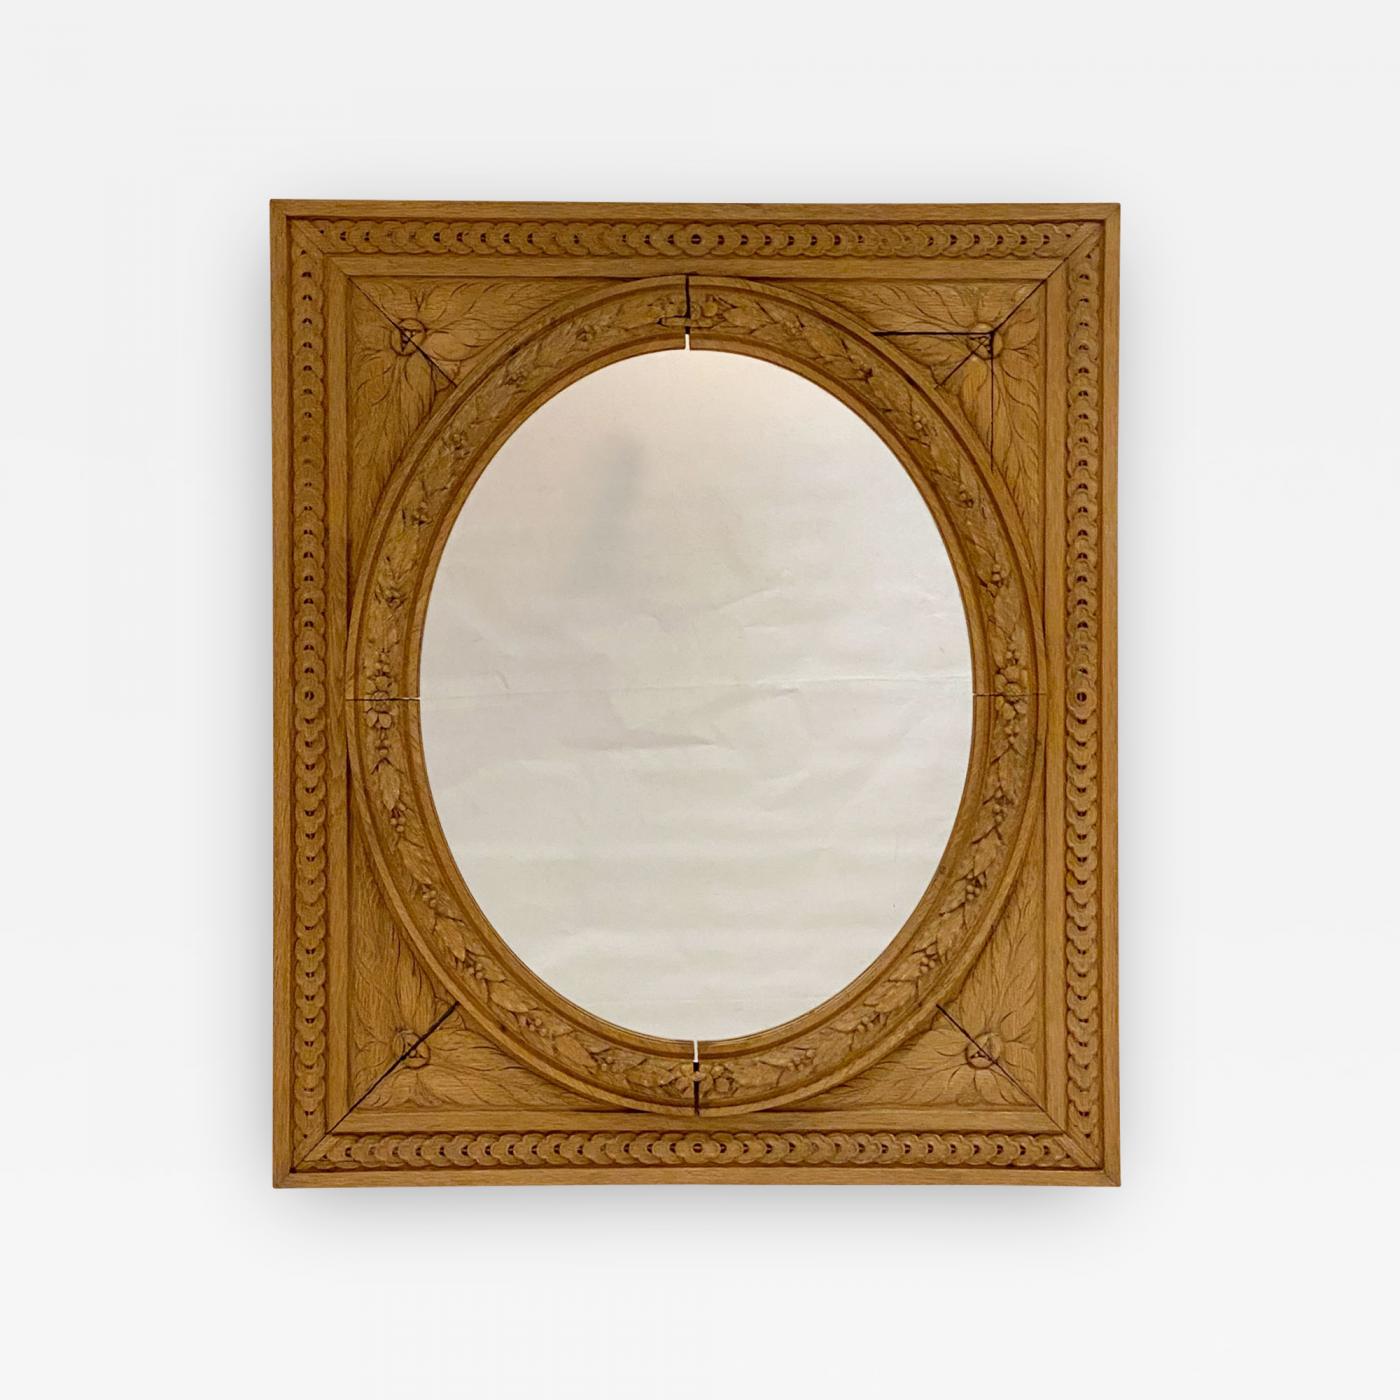 Early 21st Century French Neoclassical Square Mirrors - A Pair